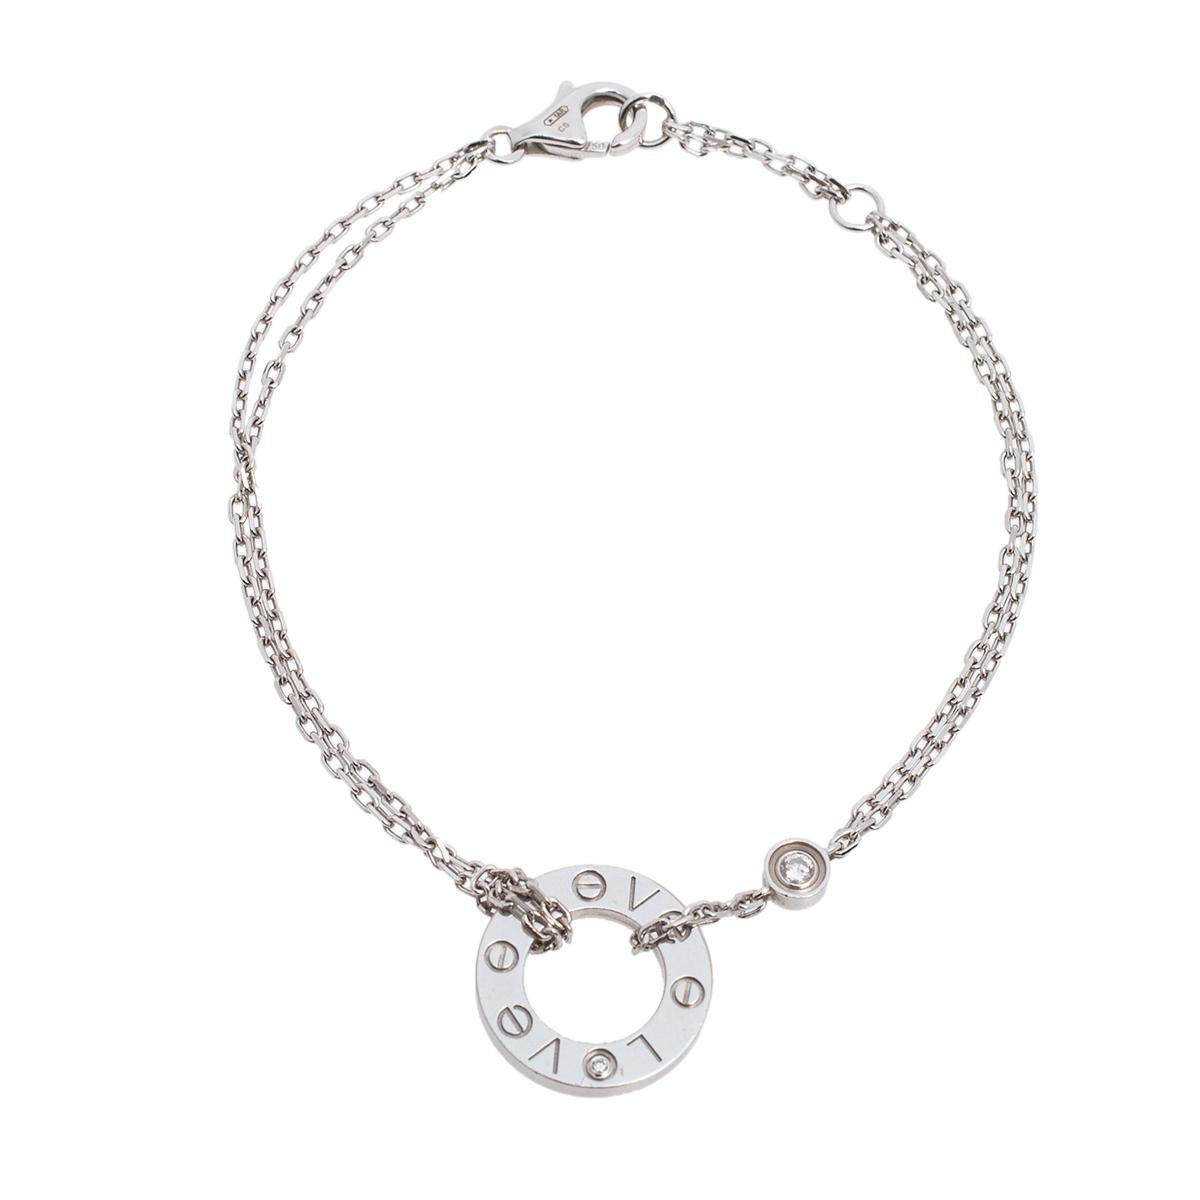 Celebrate timeless love with this bracelet from Cartier's Love collection. It is made from 18k white gold and the chains hold a diamond and a circular charm detailed with a diamond and engraved with 'LOVE'. Finished with a lobster clasp, this iconic